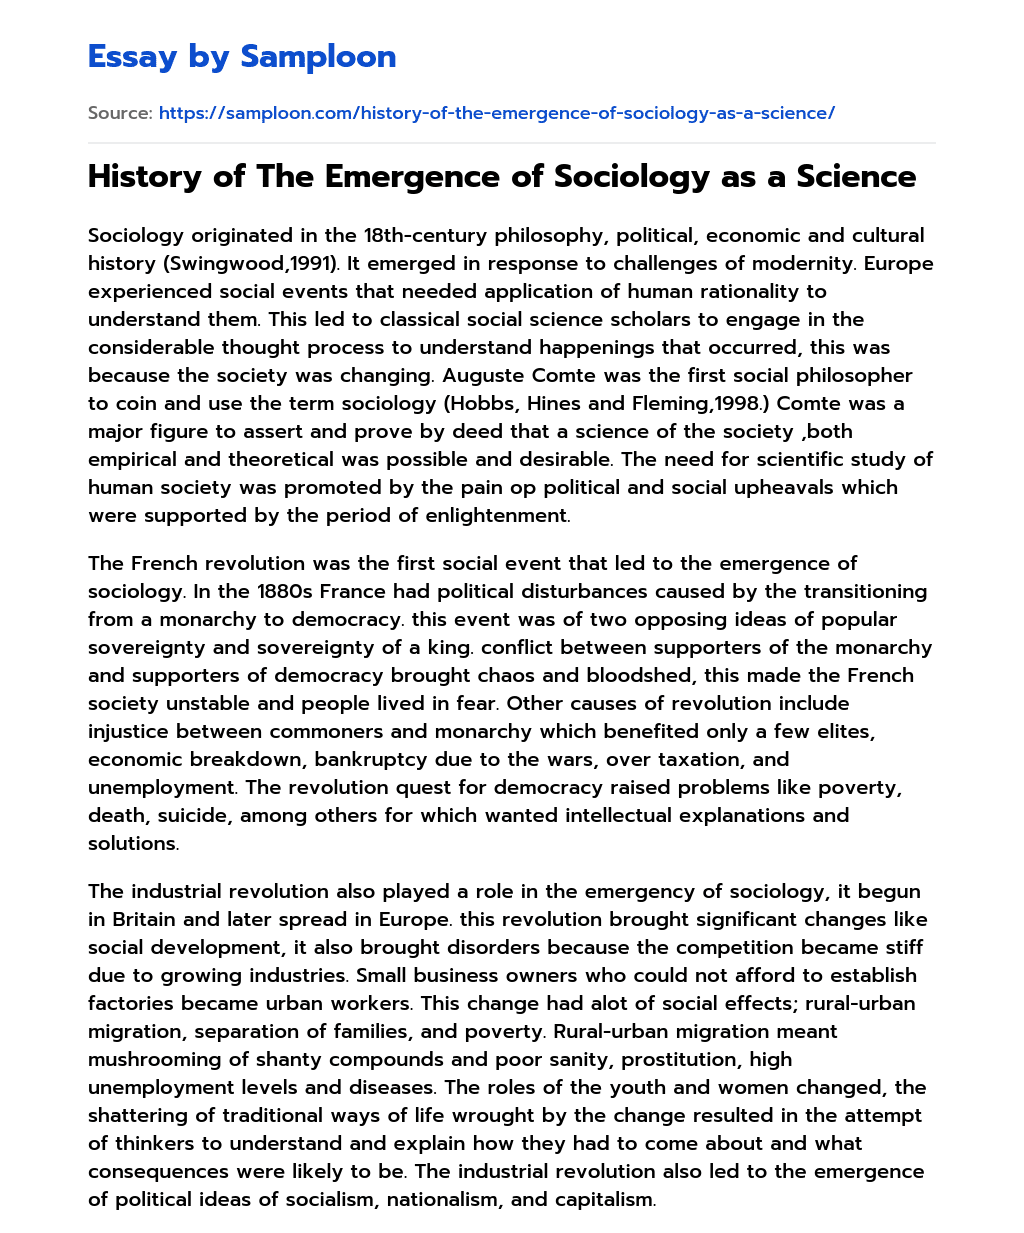 History of The Emergence of Sociology as a Science essay